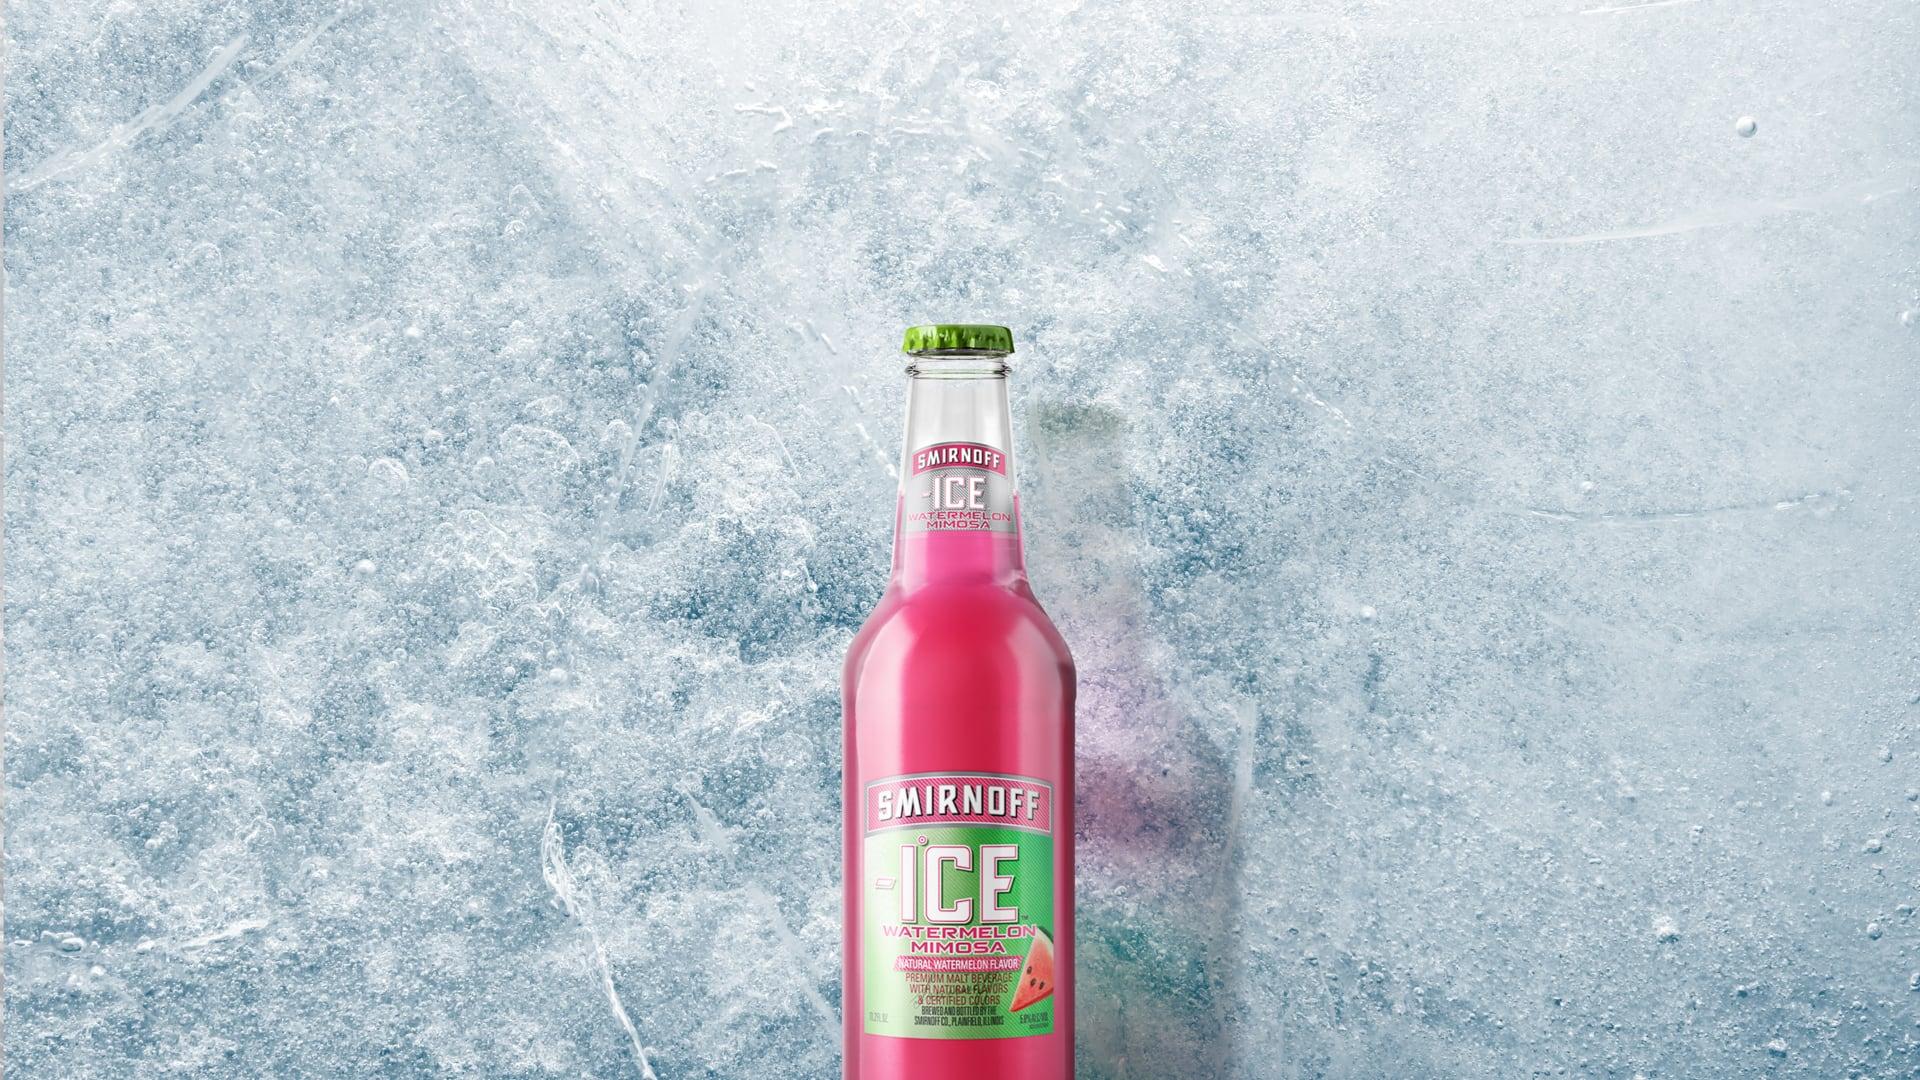 Smirnoff Ice Watermelon Mimosa on a Icy background